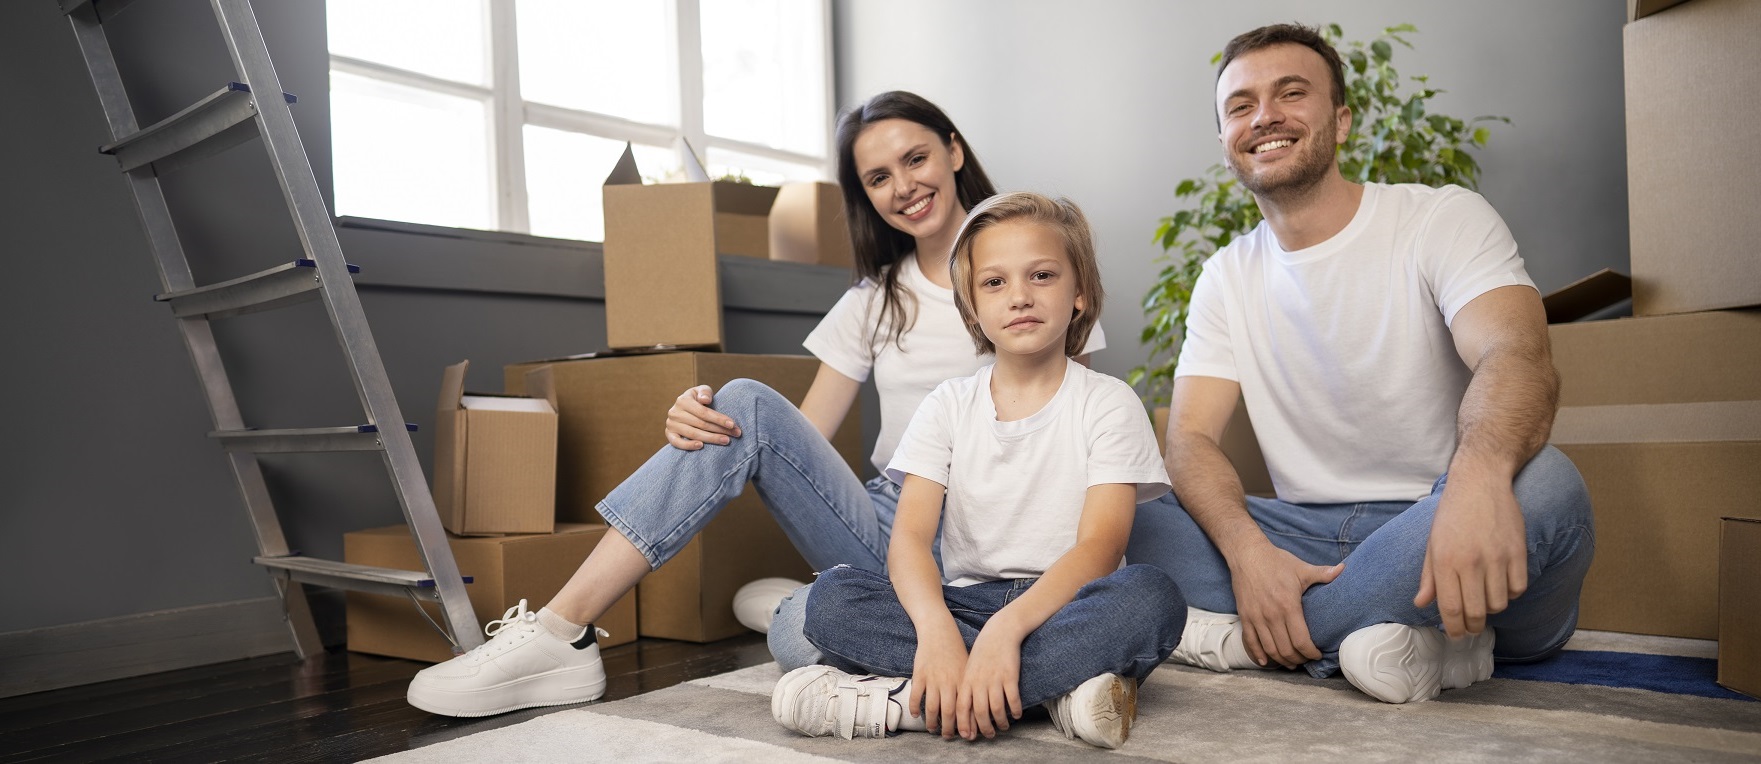 Moving Services in the Greater Toronto Area (GTA)